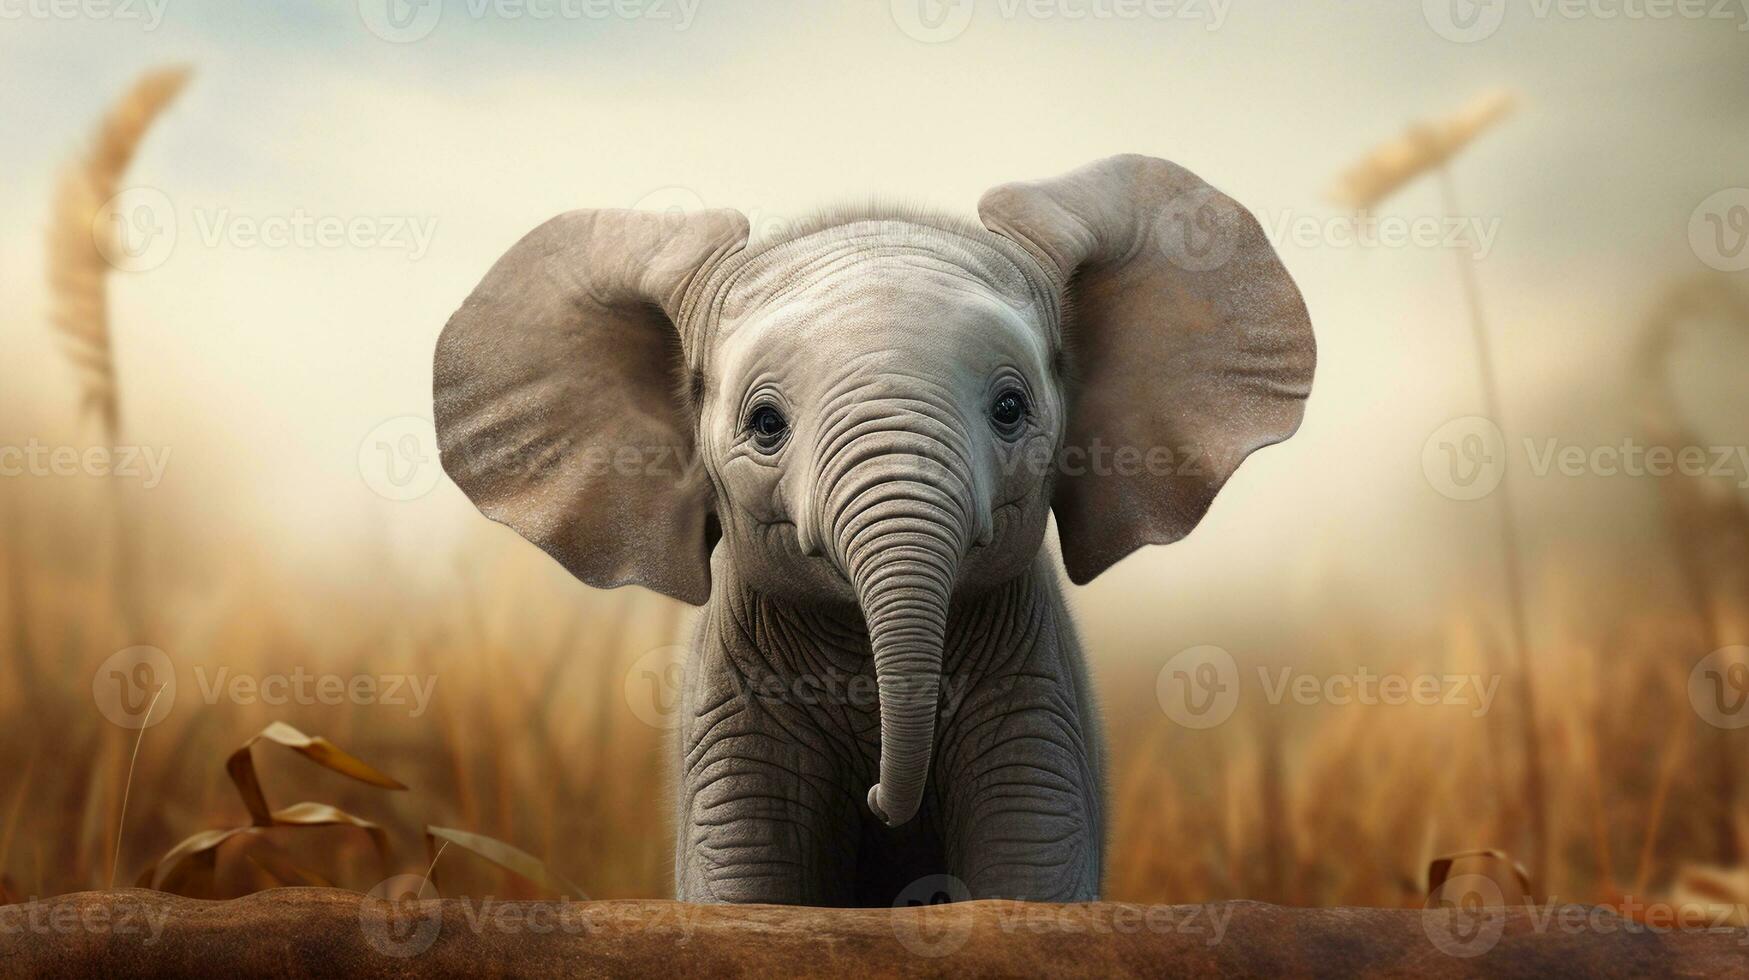 Cute Baby Elephant Stock Photos, Images and Backgrounds for Free Download